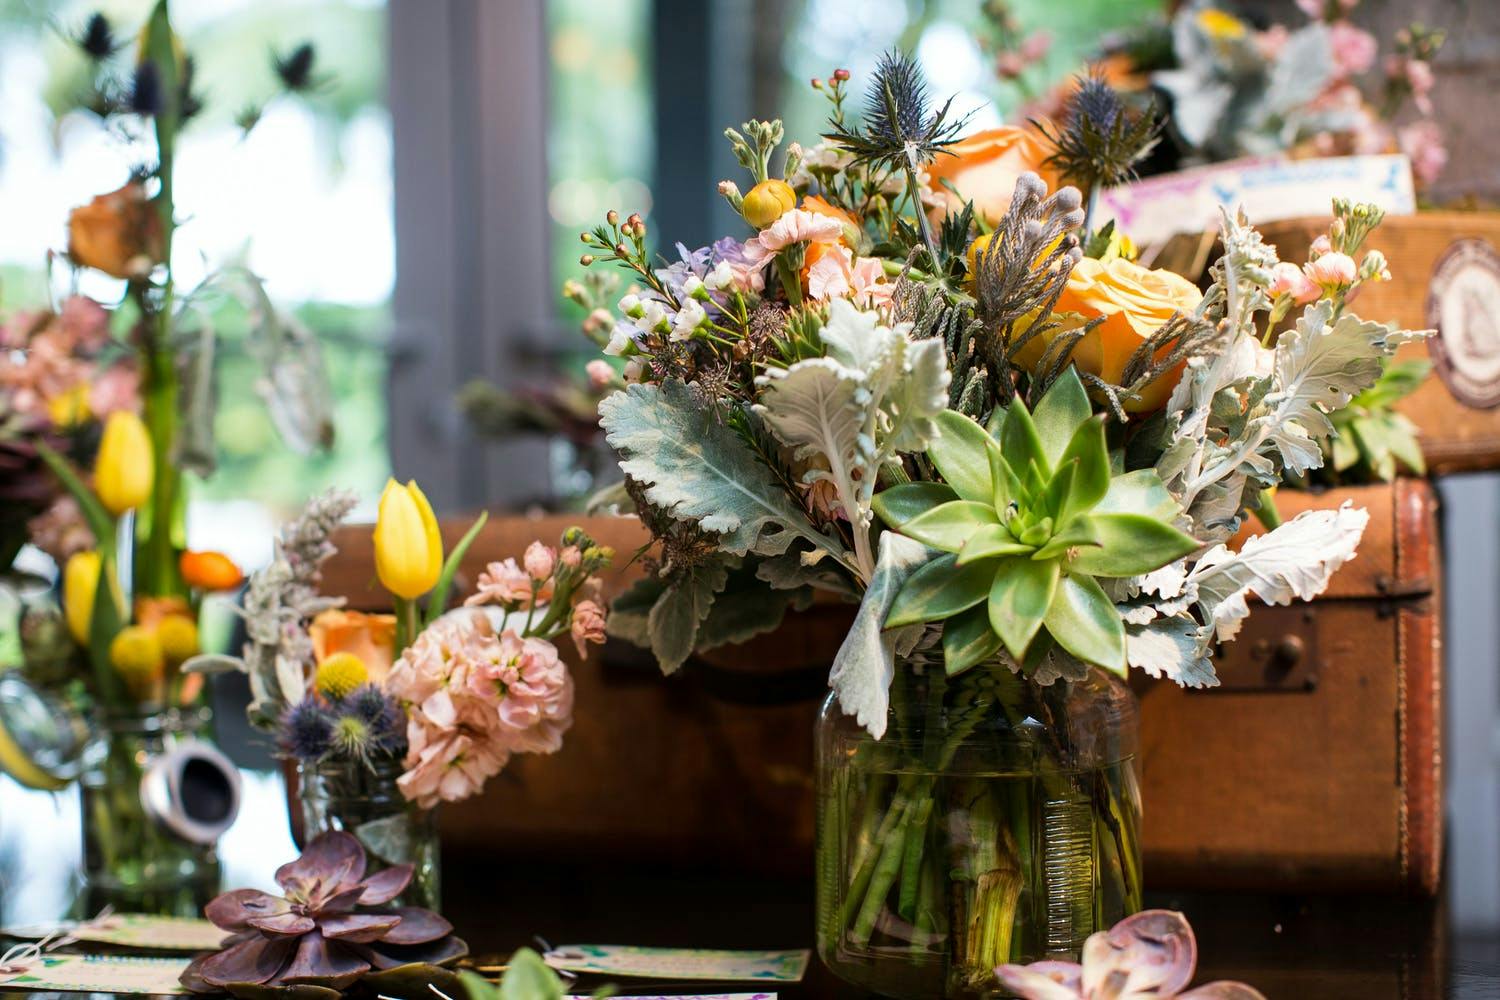 Bright Floral Wedding Centerpieces With Succulents and Rustic Suitcases | PartySlate